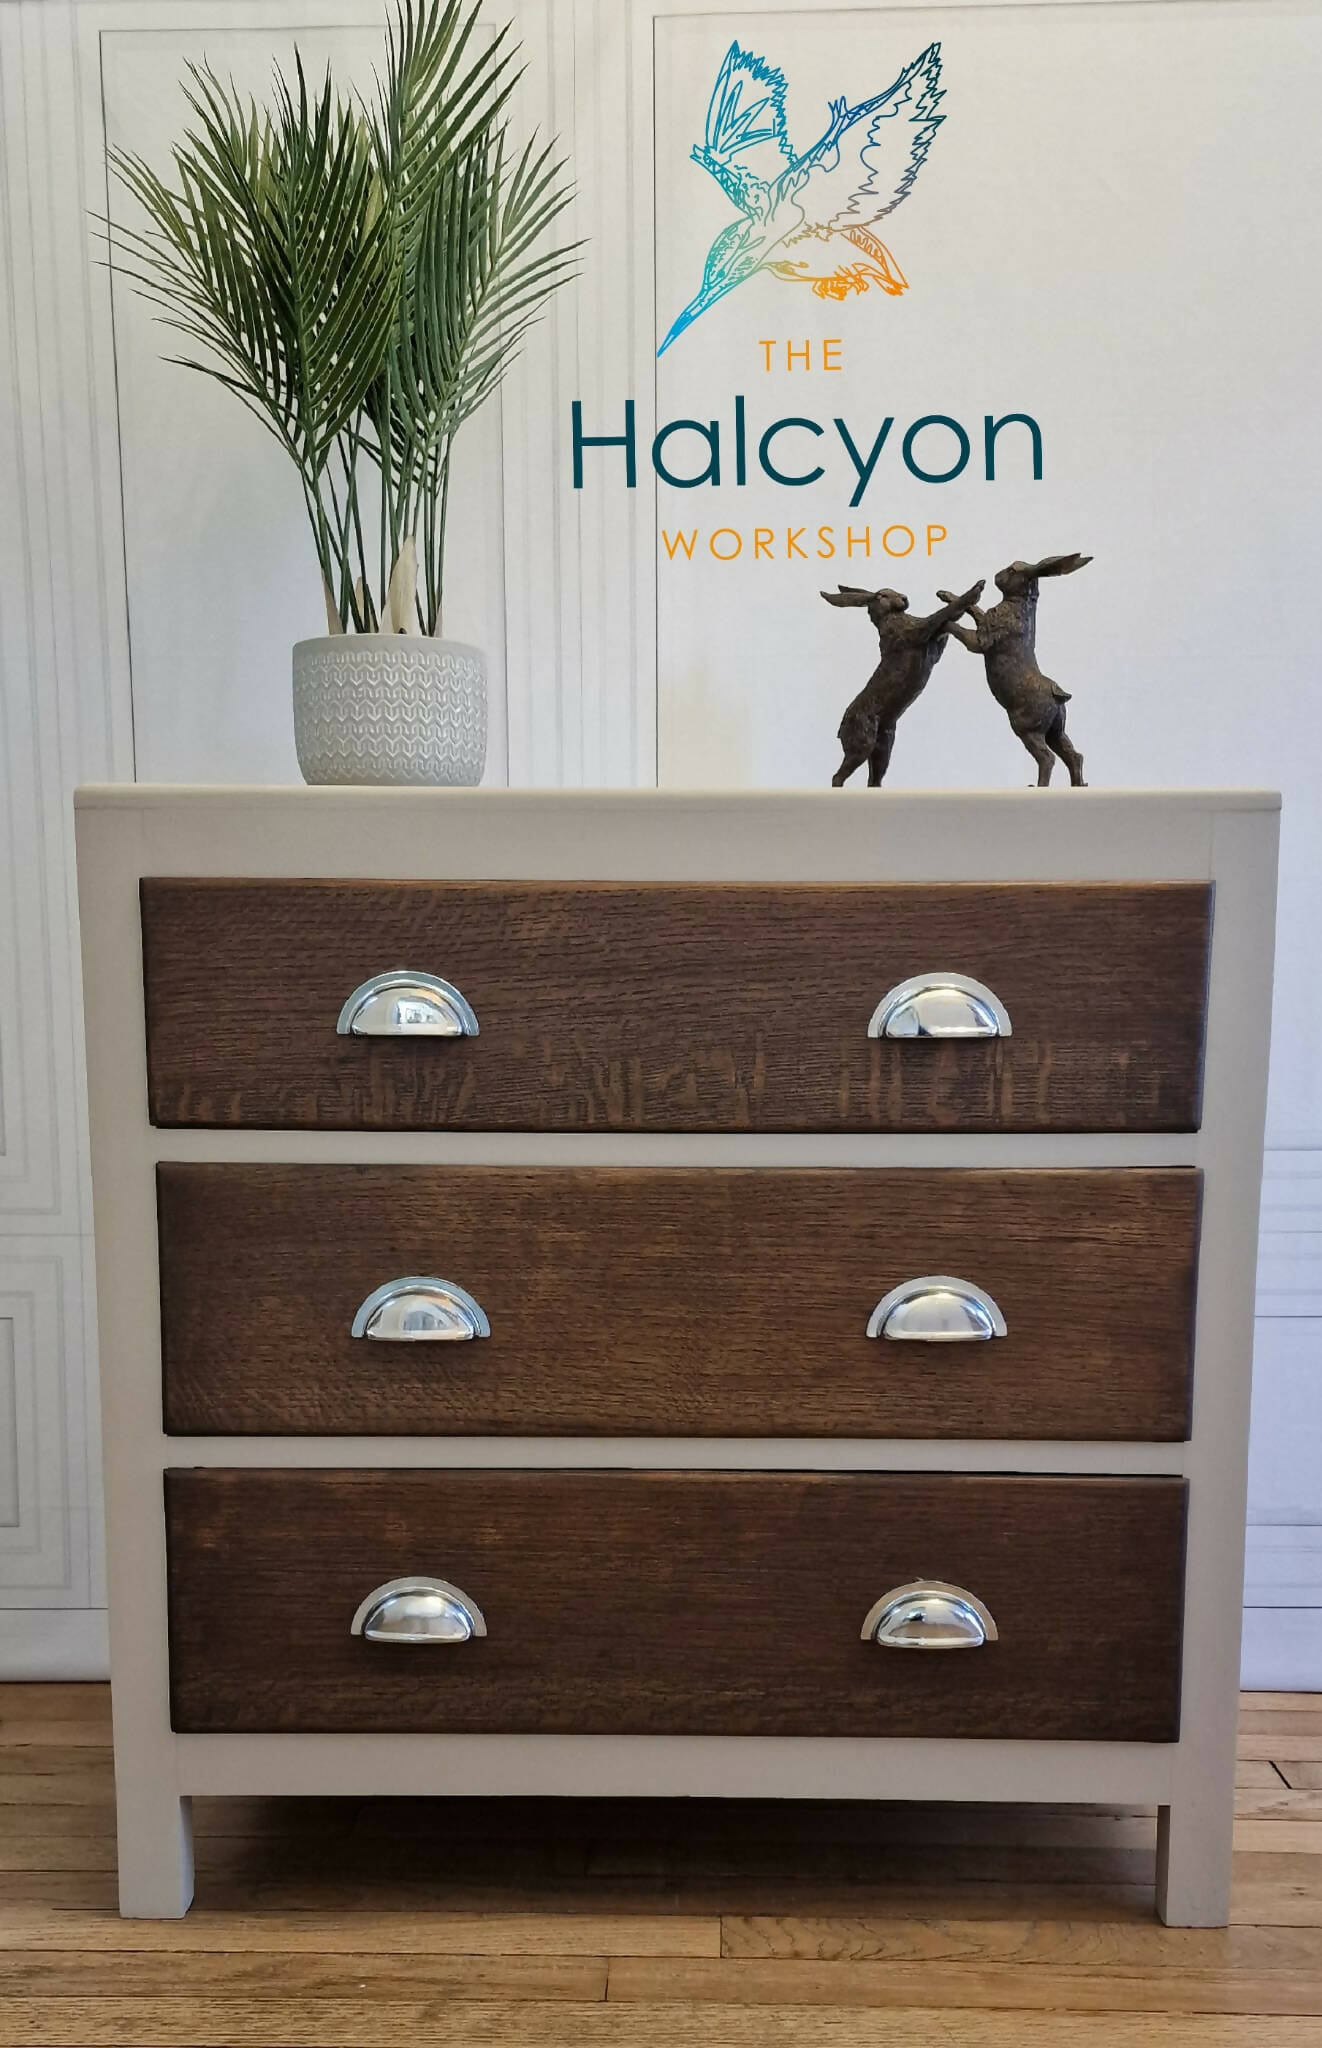 ***NOW SOLD**** Oak Chest of Drawers